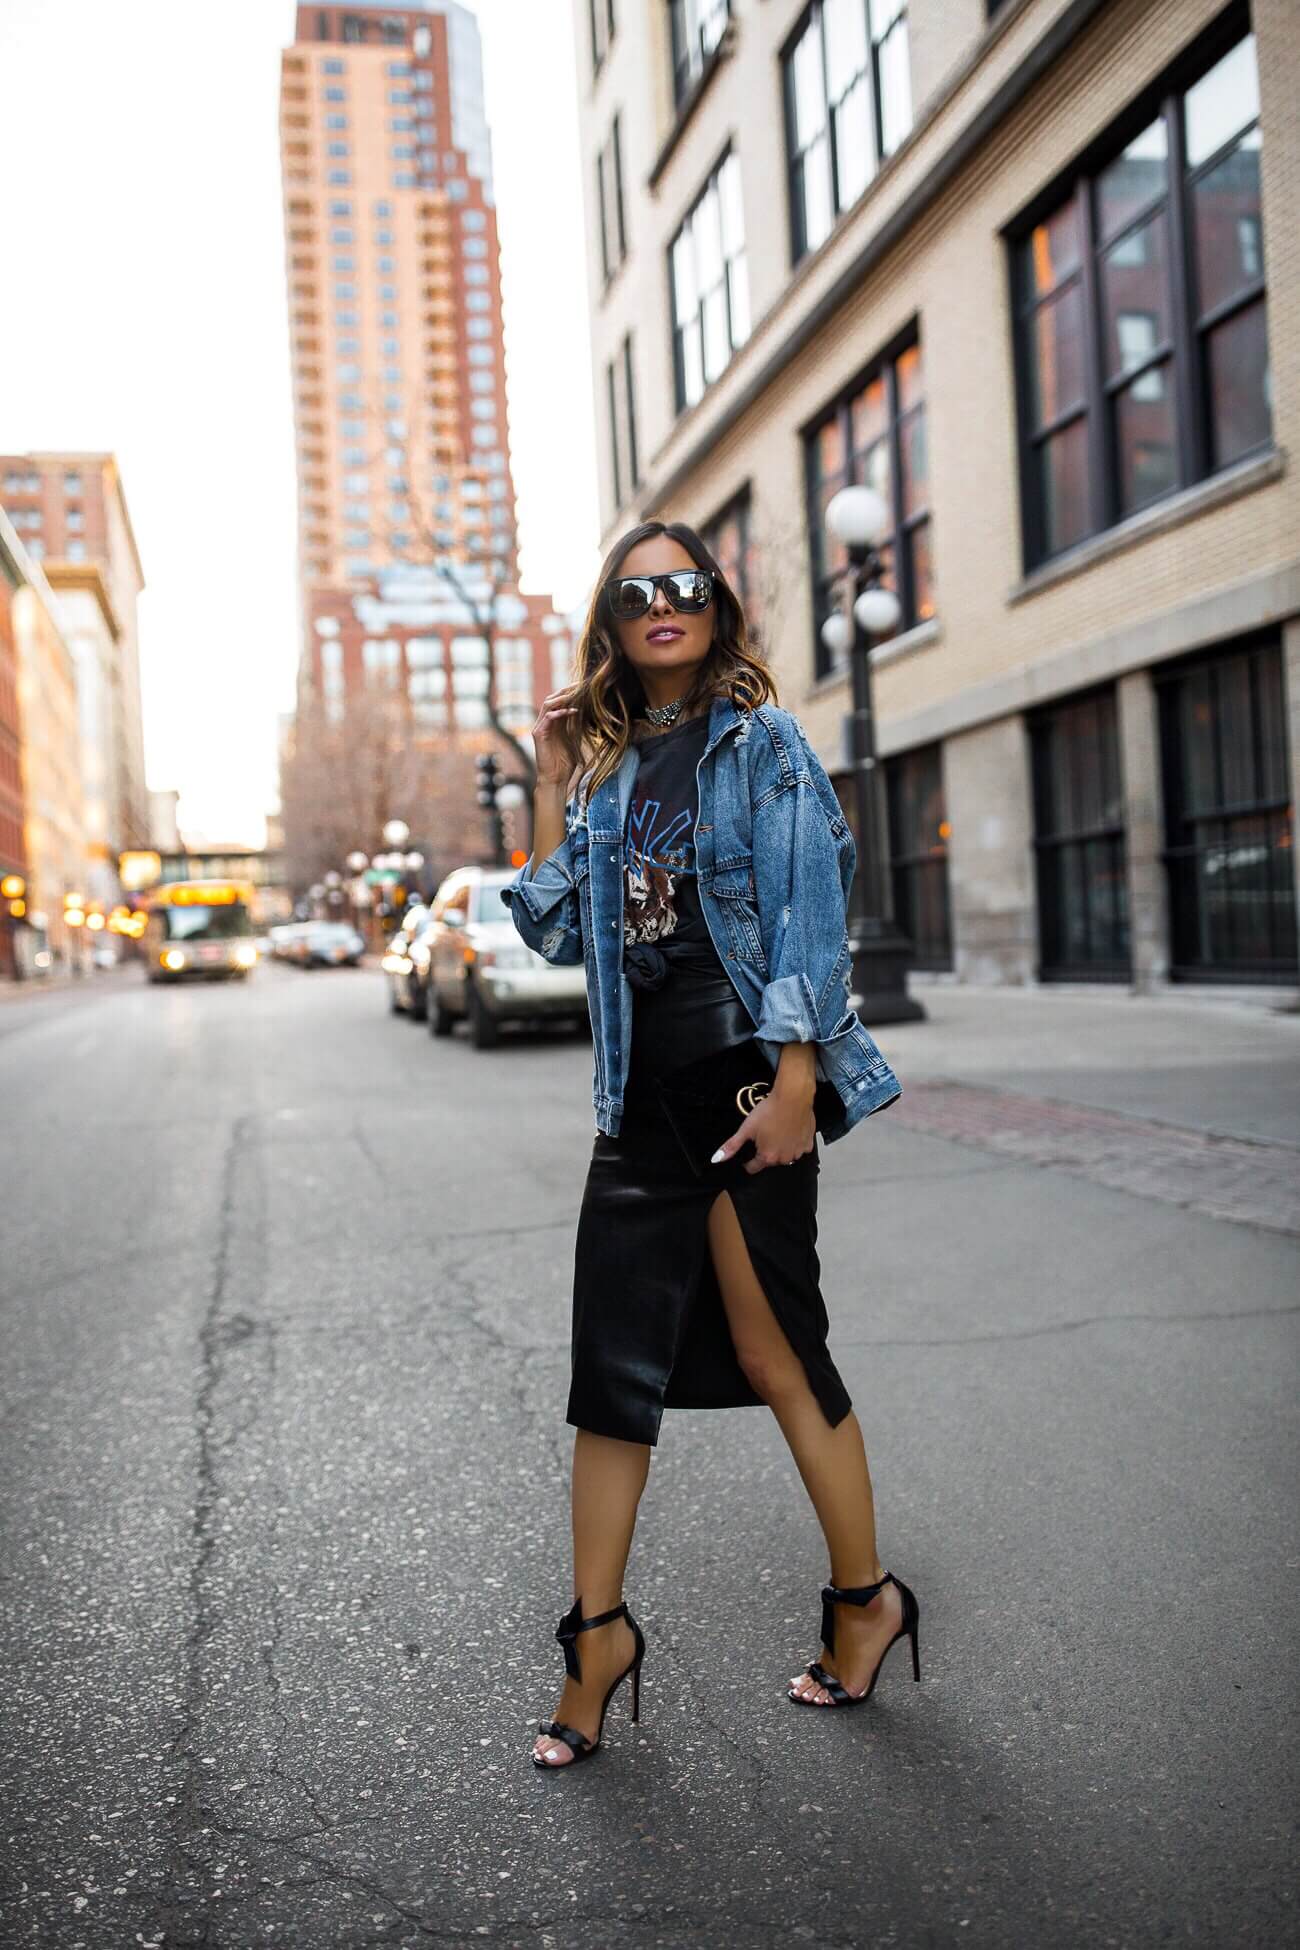 fashion blogger mia mia mine wearing a graphic tee and denim jacket for spring